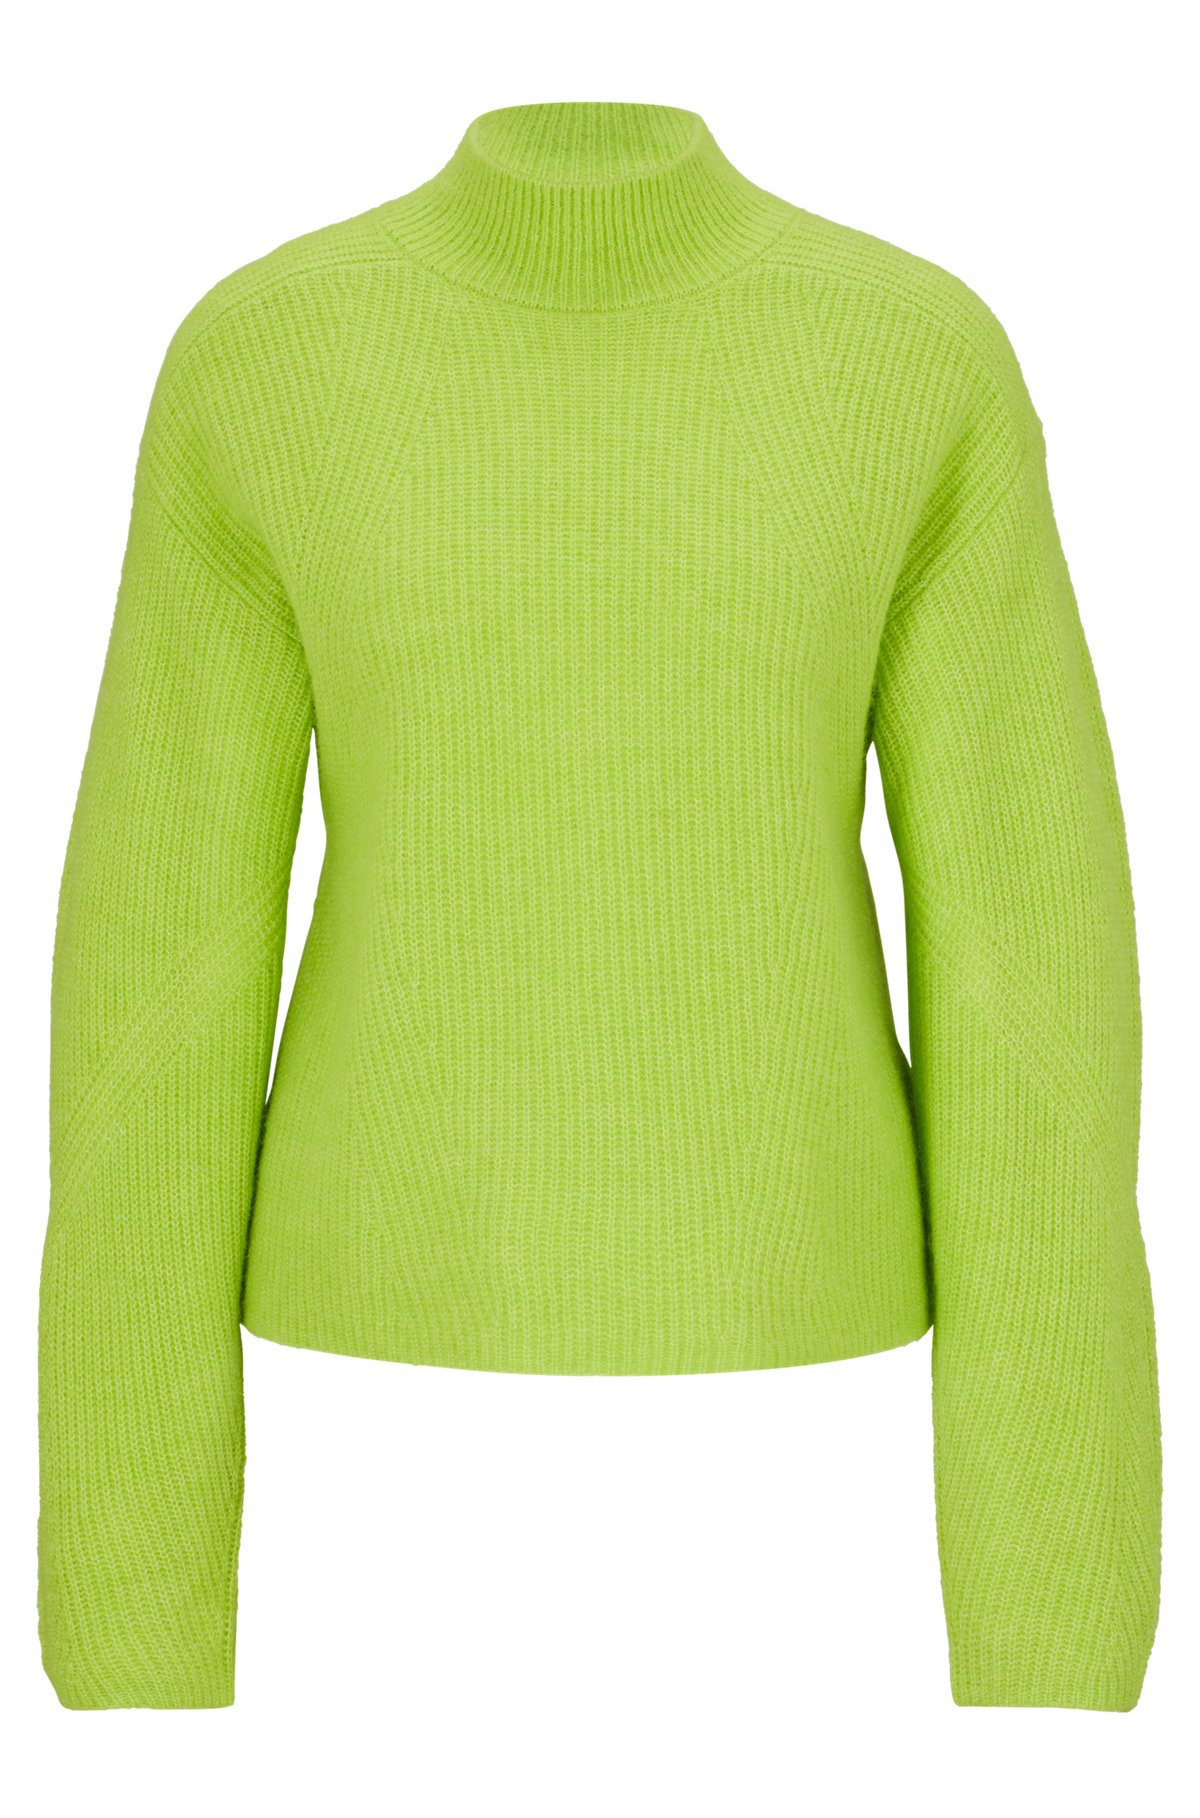 Knitted sweater with mock neckline, Yellow